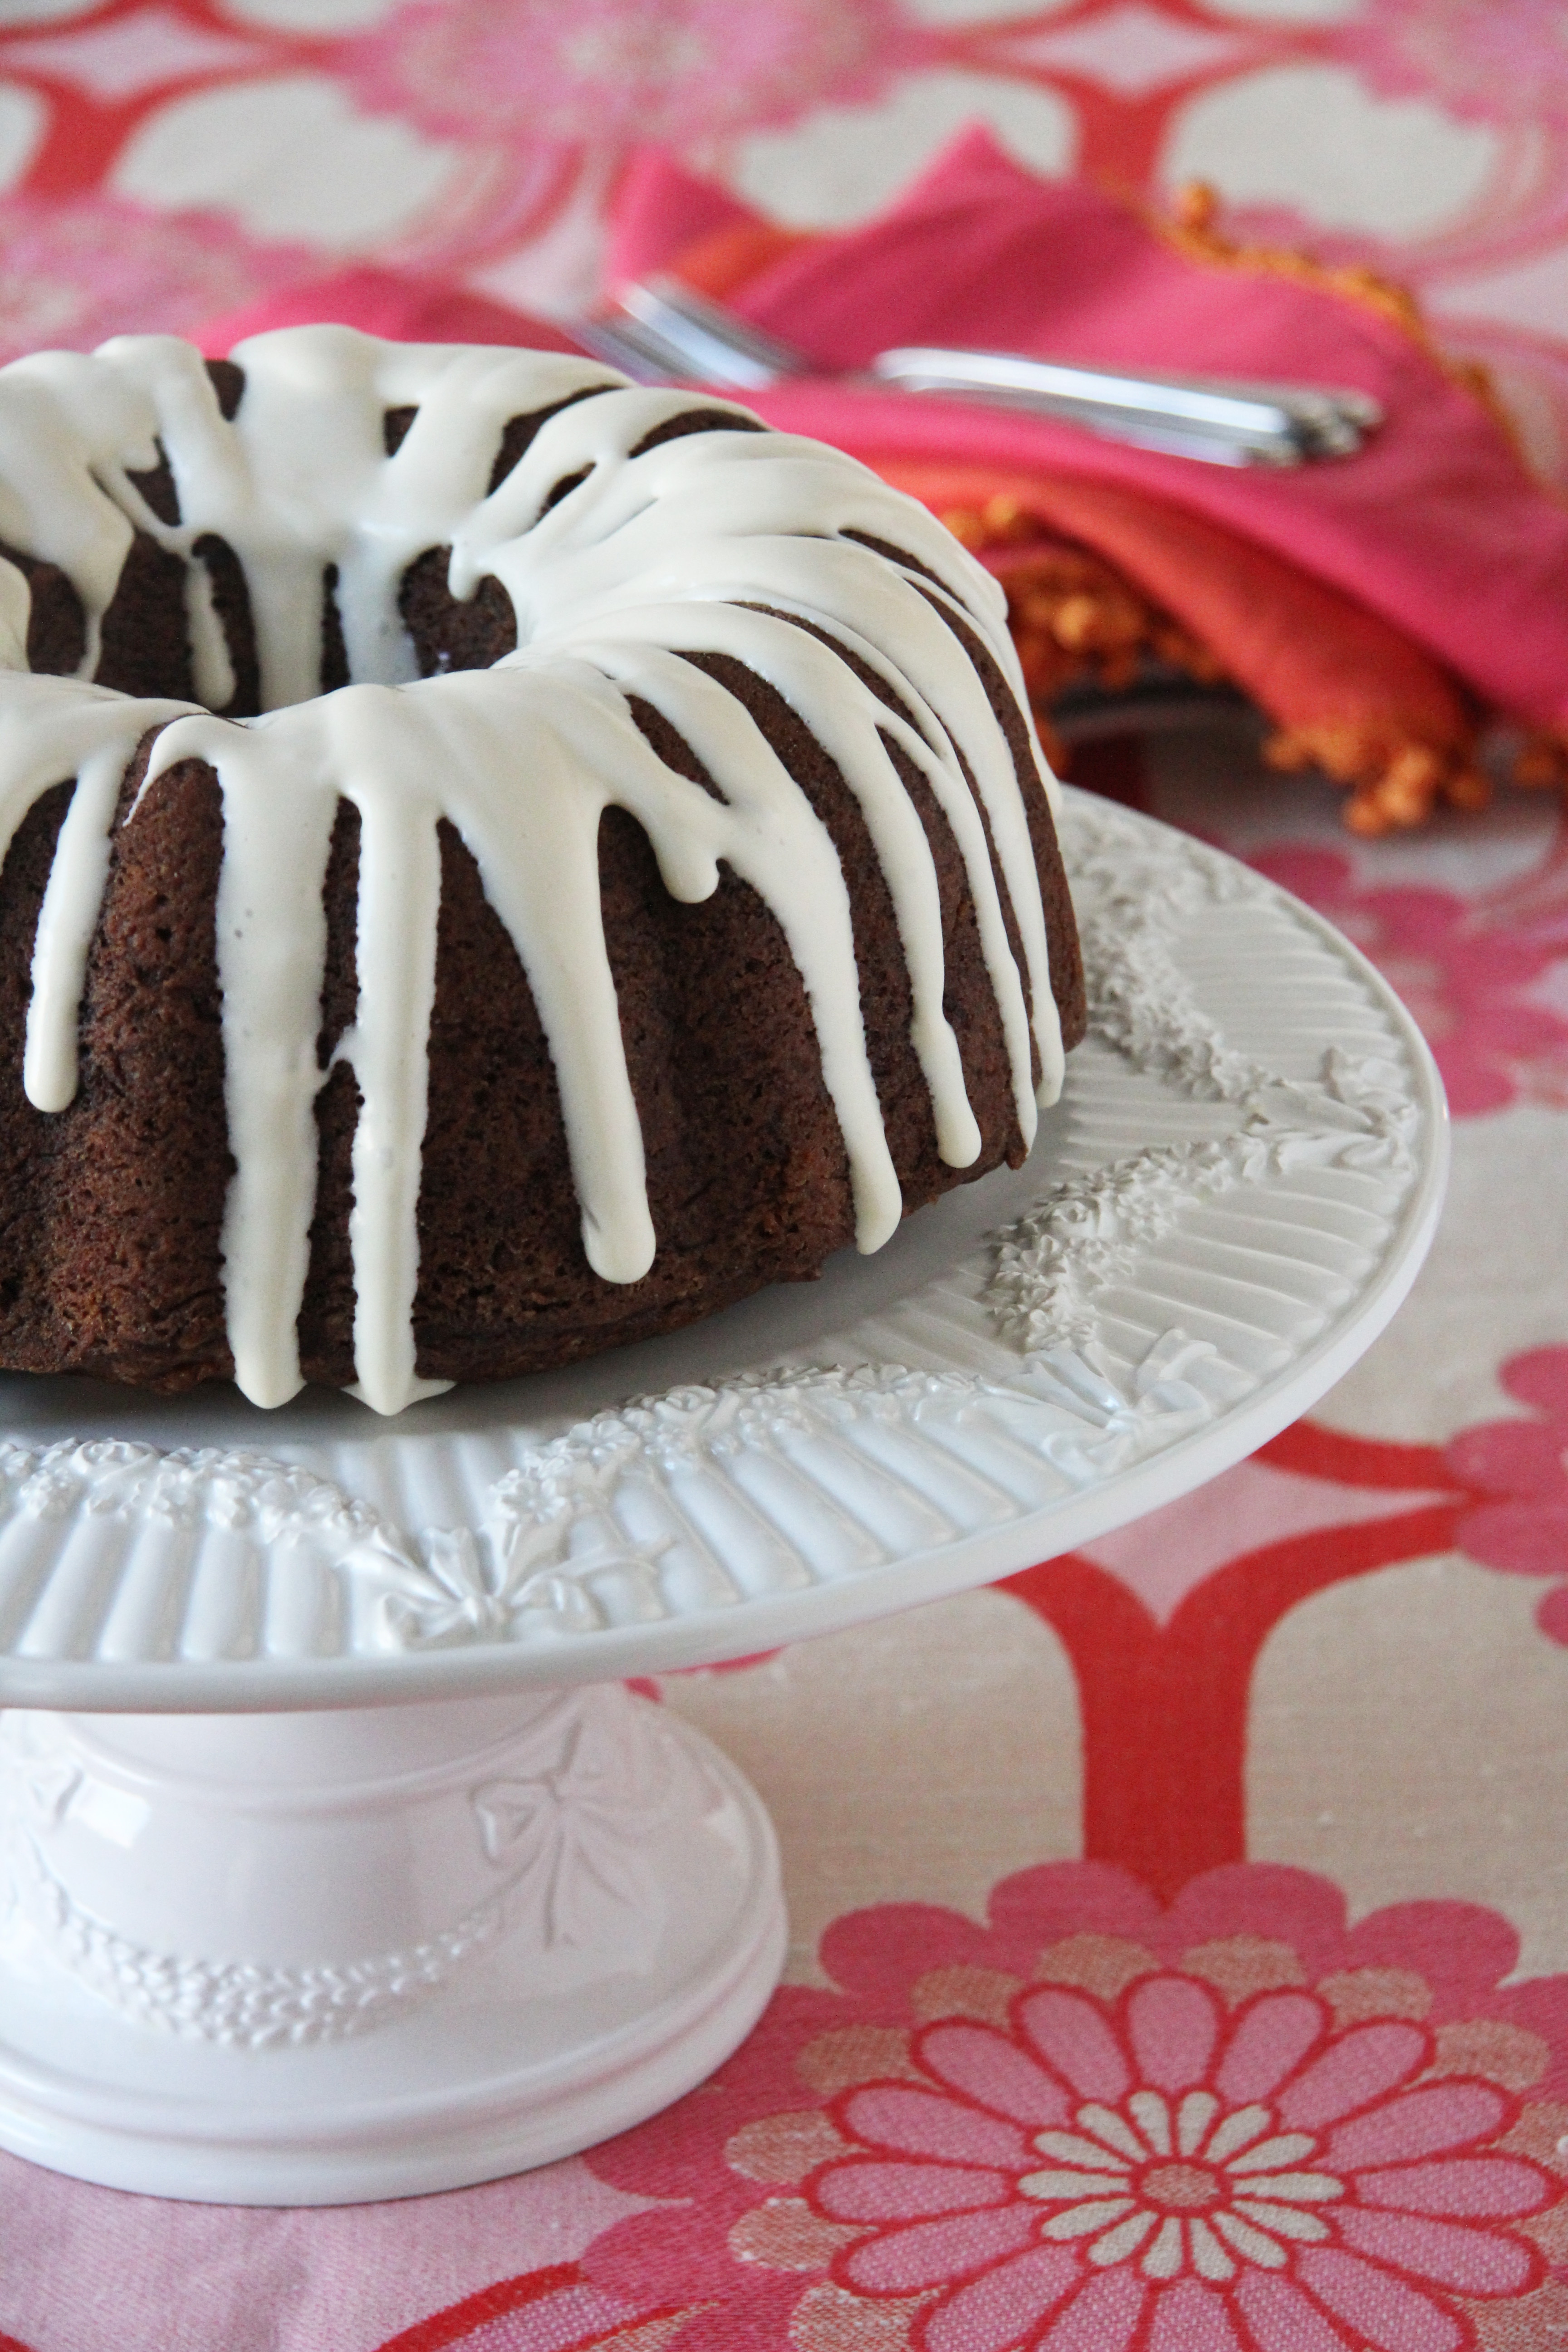 You will want to make this super easy and delicious Spiced Apple Walnut Bundt Cake that is perfect for Easter or Mother's Day.